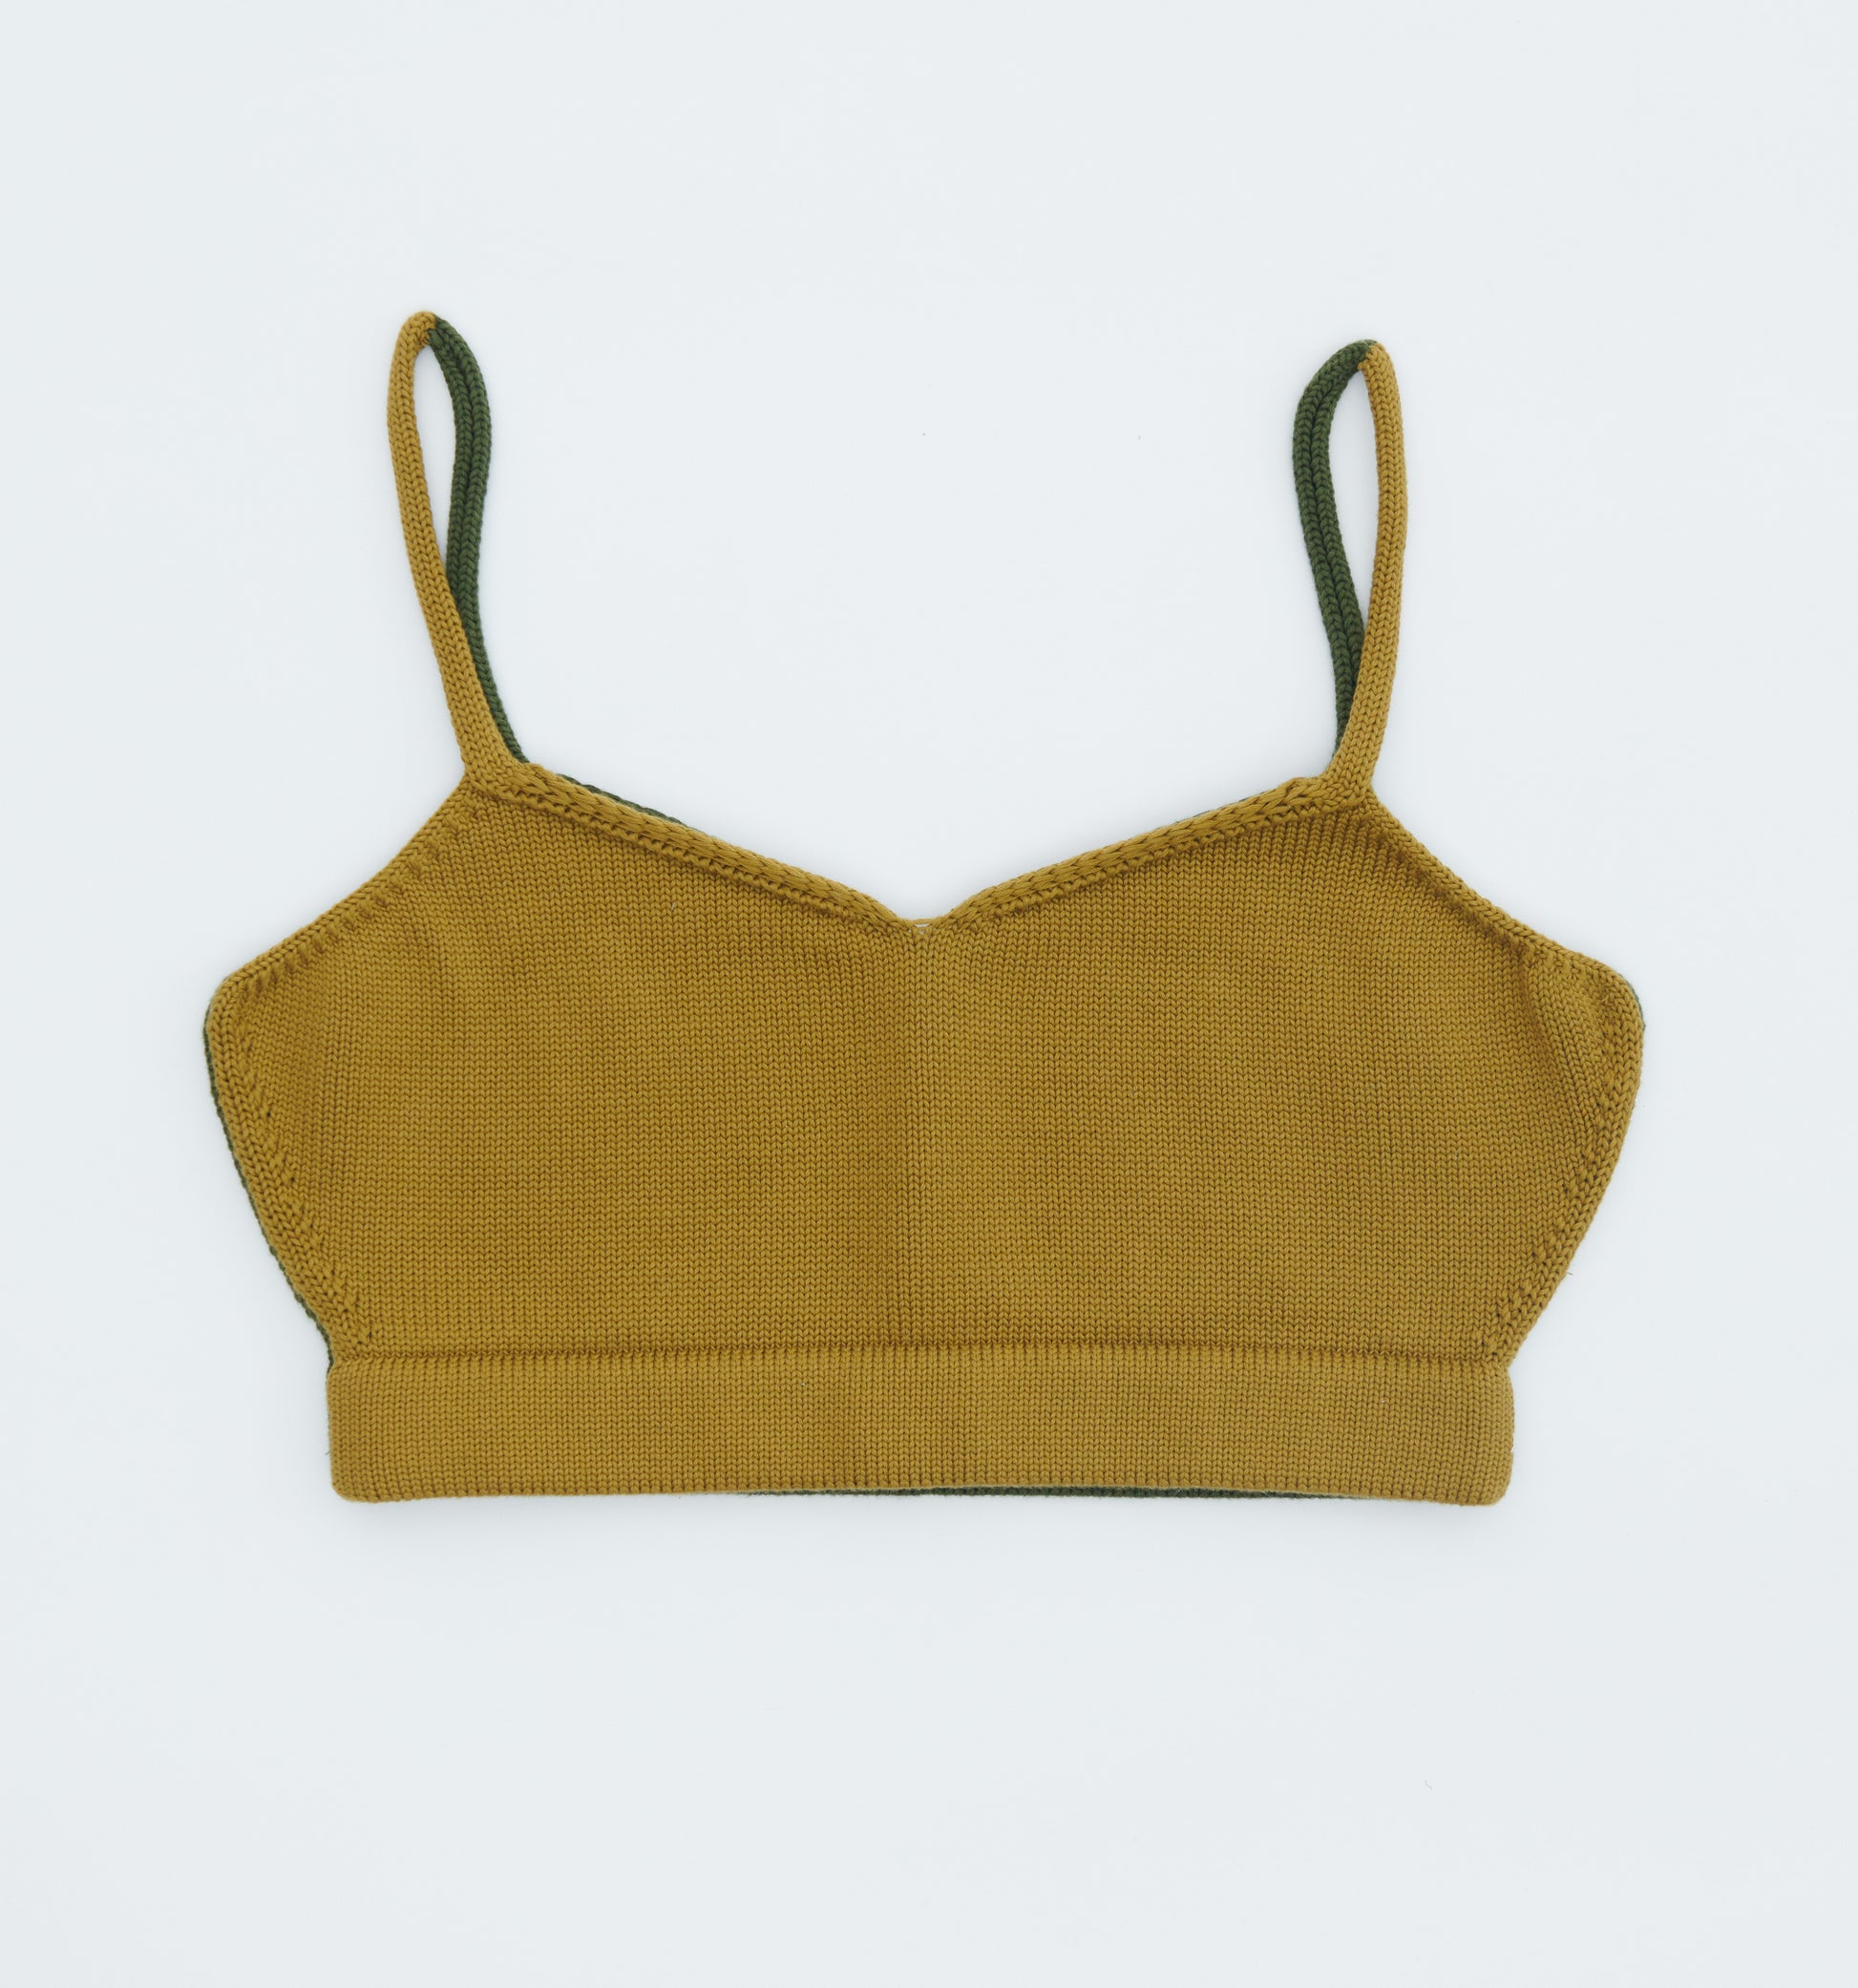 How to cut and sew the PERFECT 🔥🔥REVERSIBLE BRALETTE TOP💯 